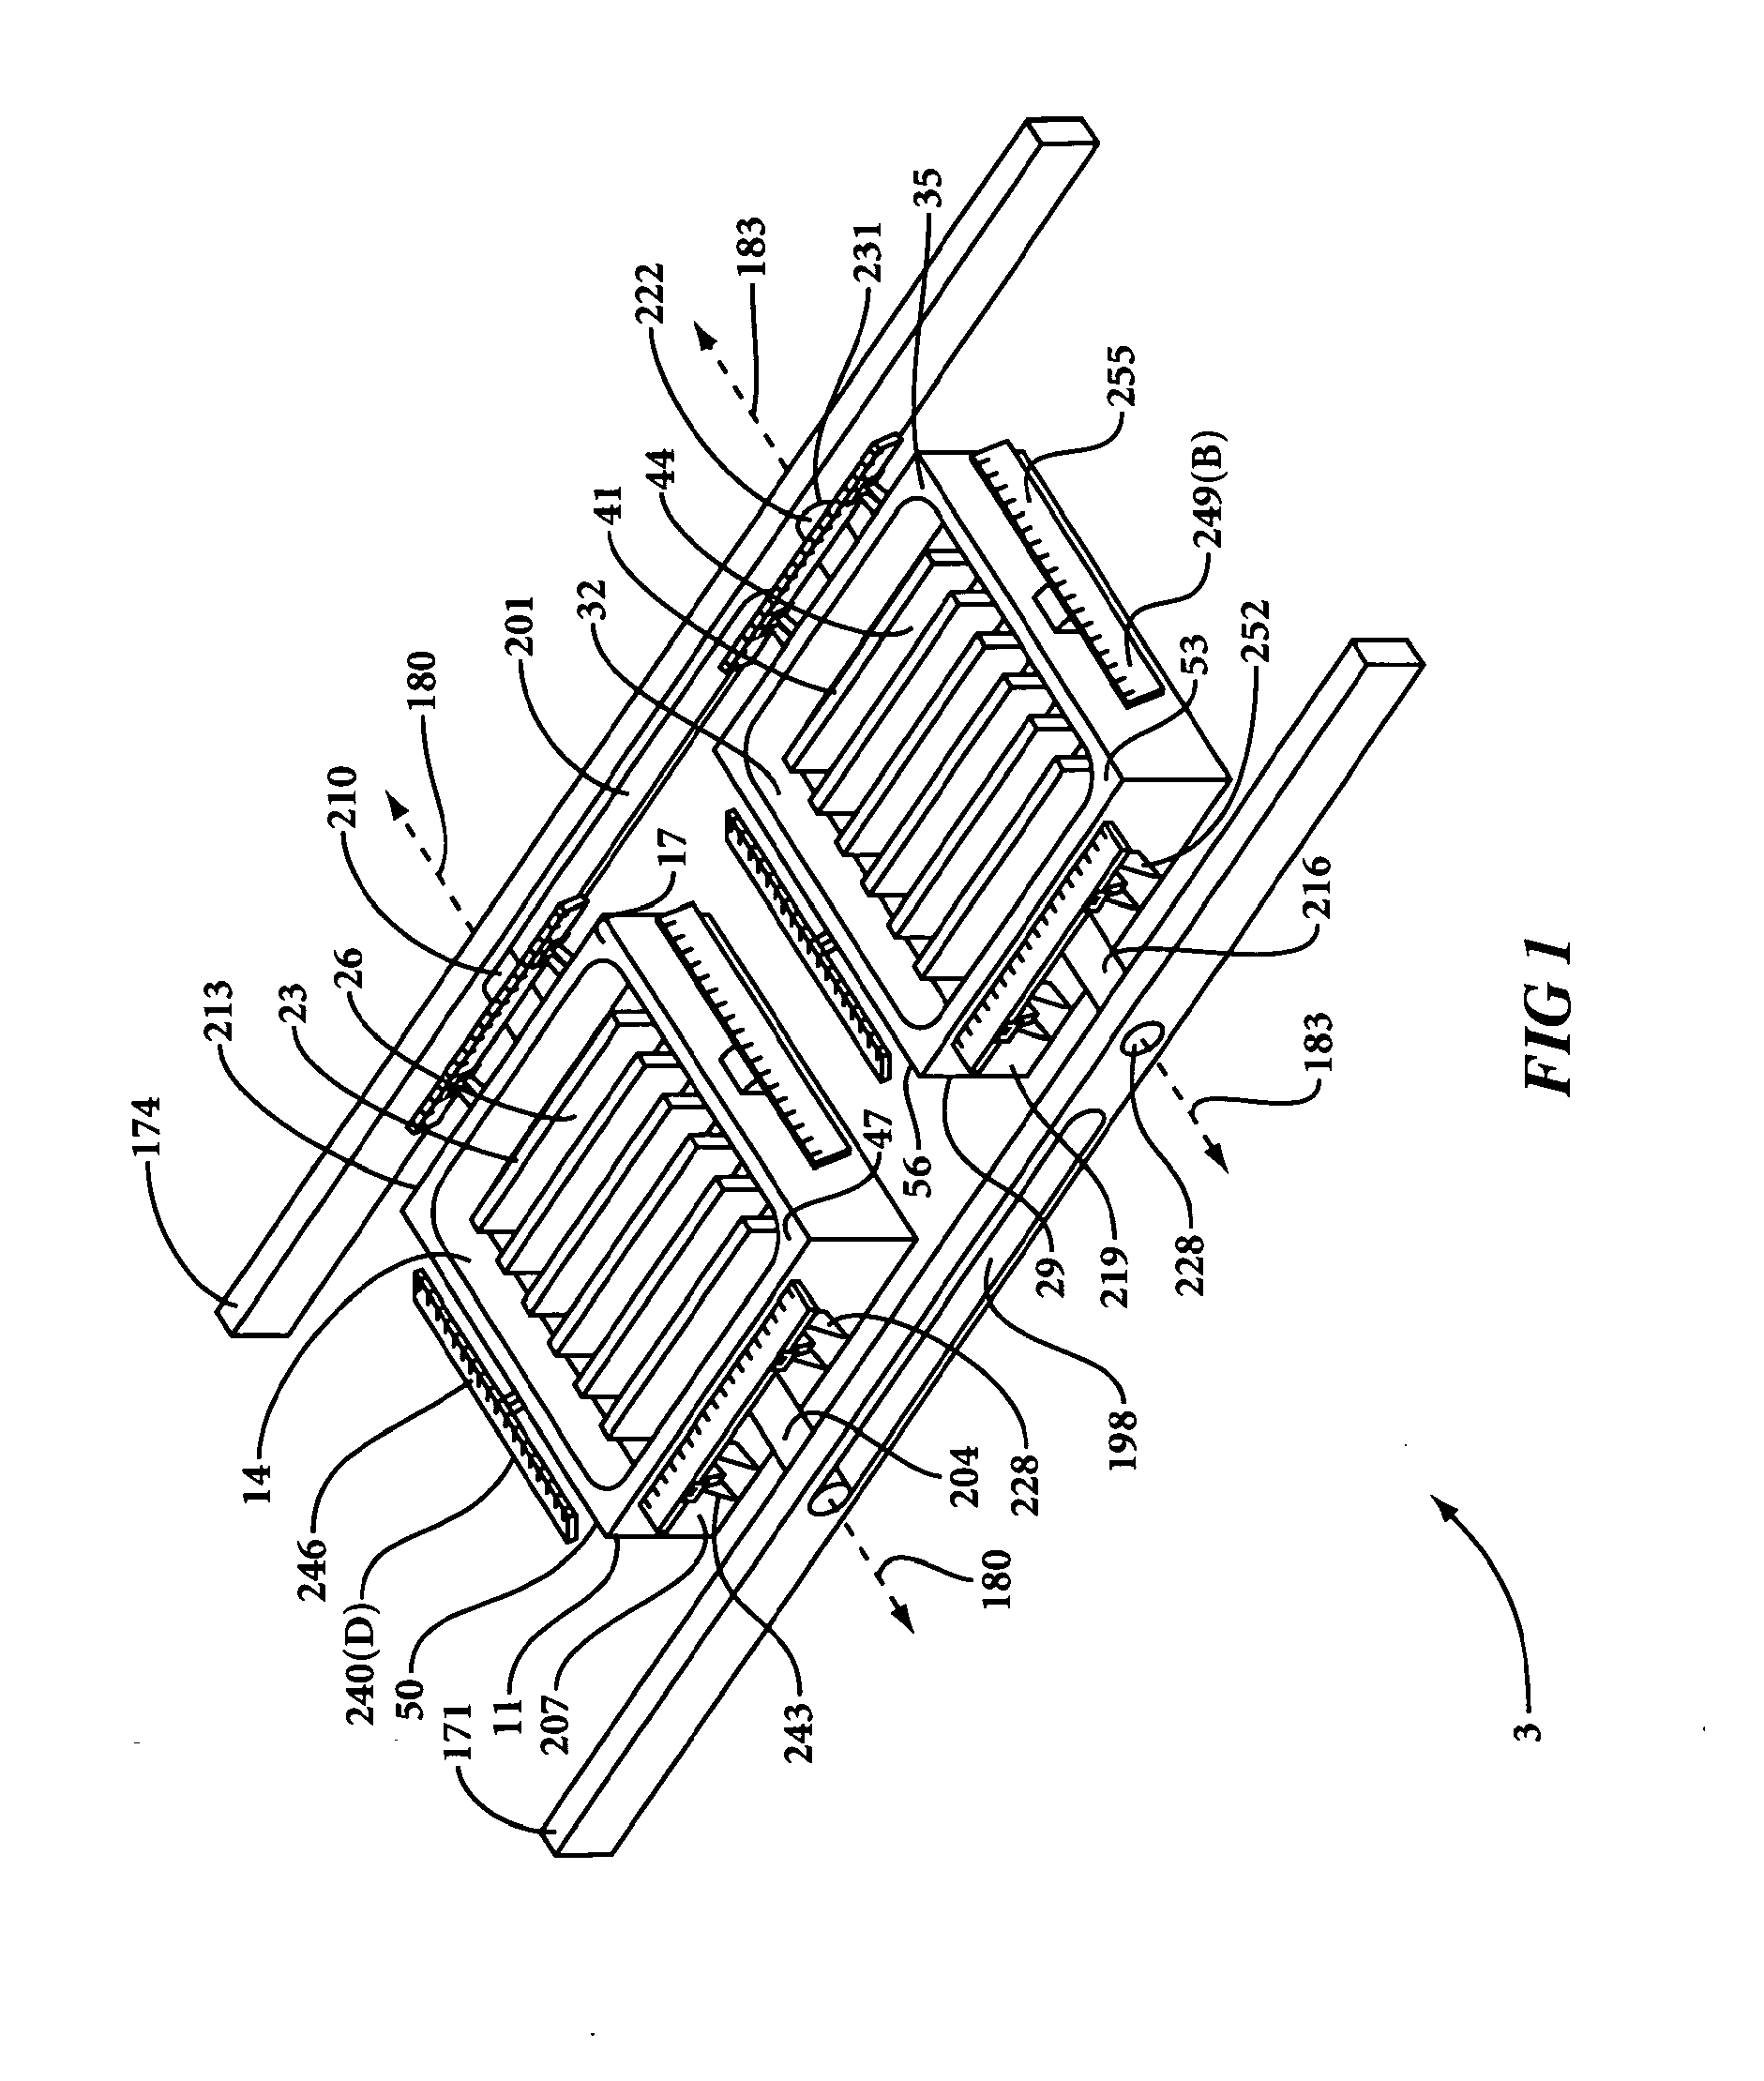 Method of Forming a Molded Article From Thermoformable Thermoplastic Sheets